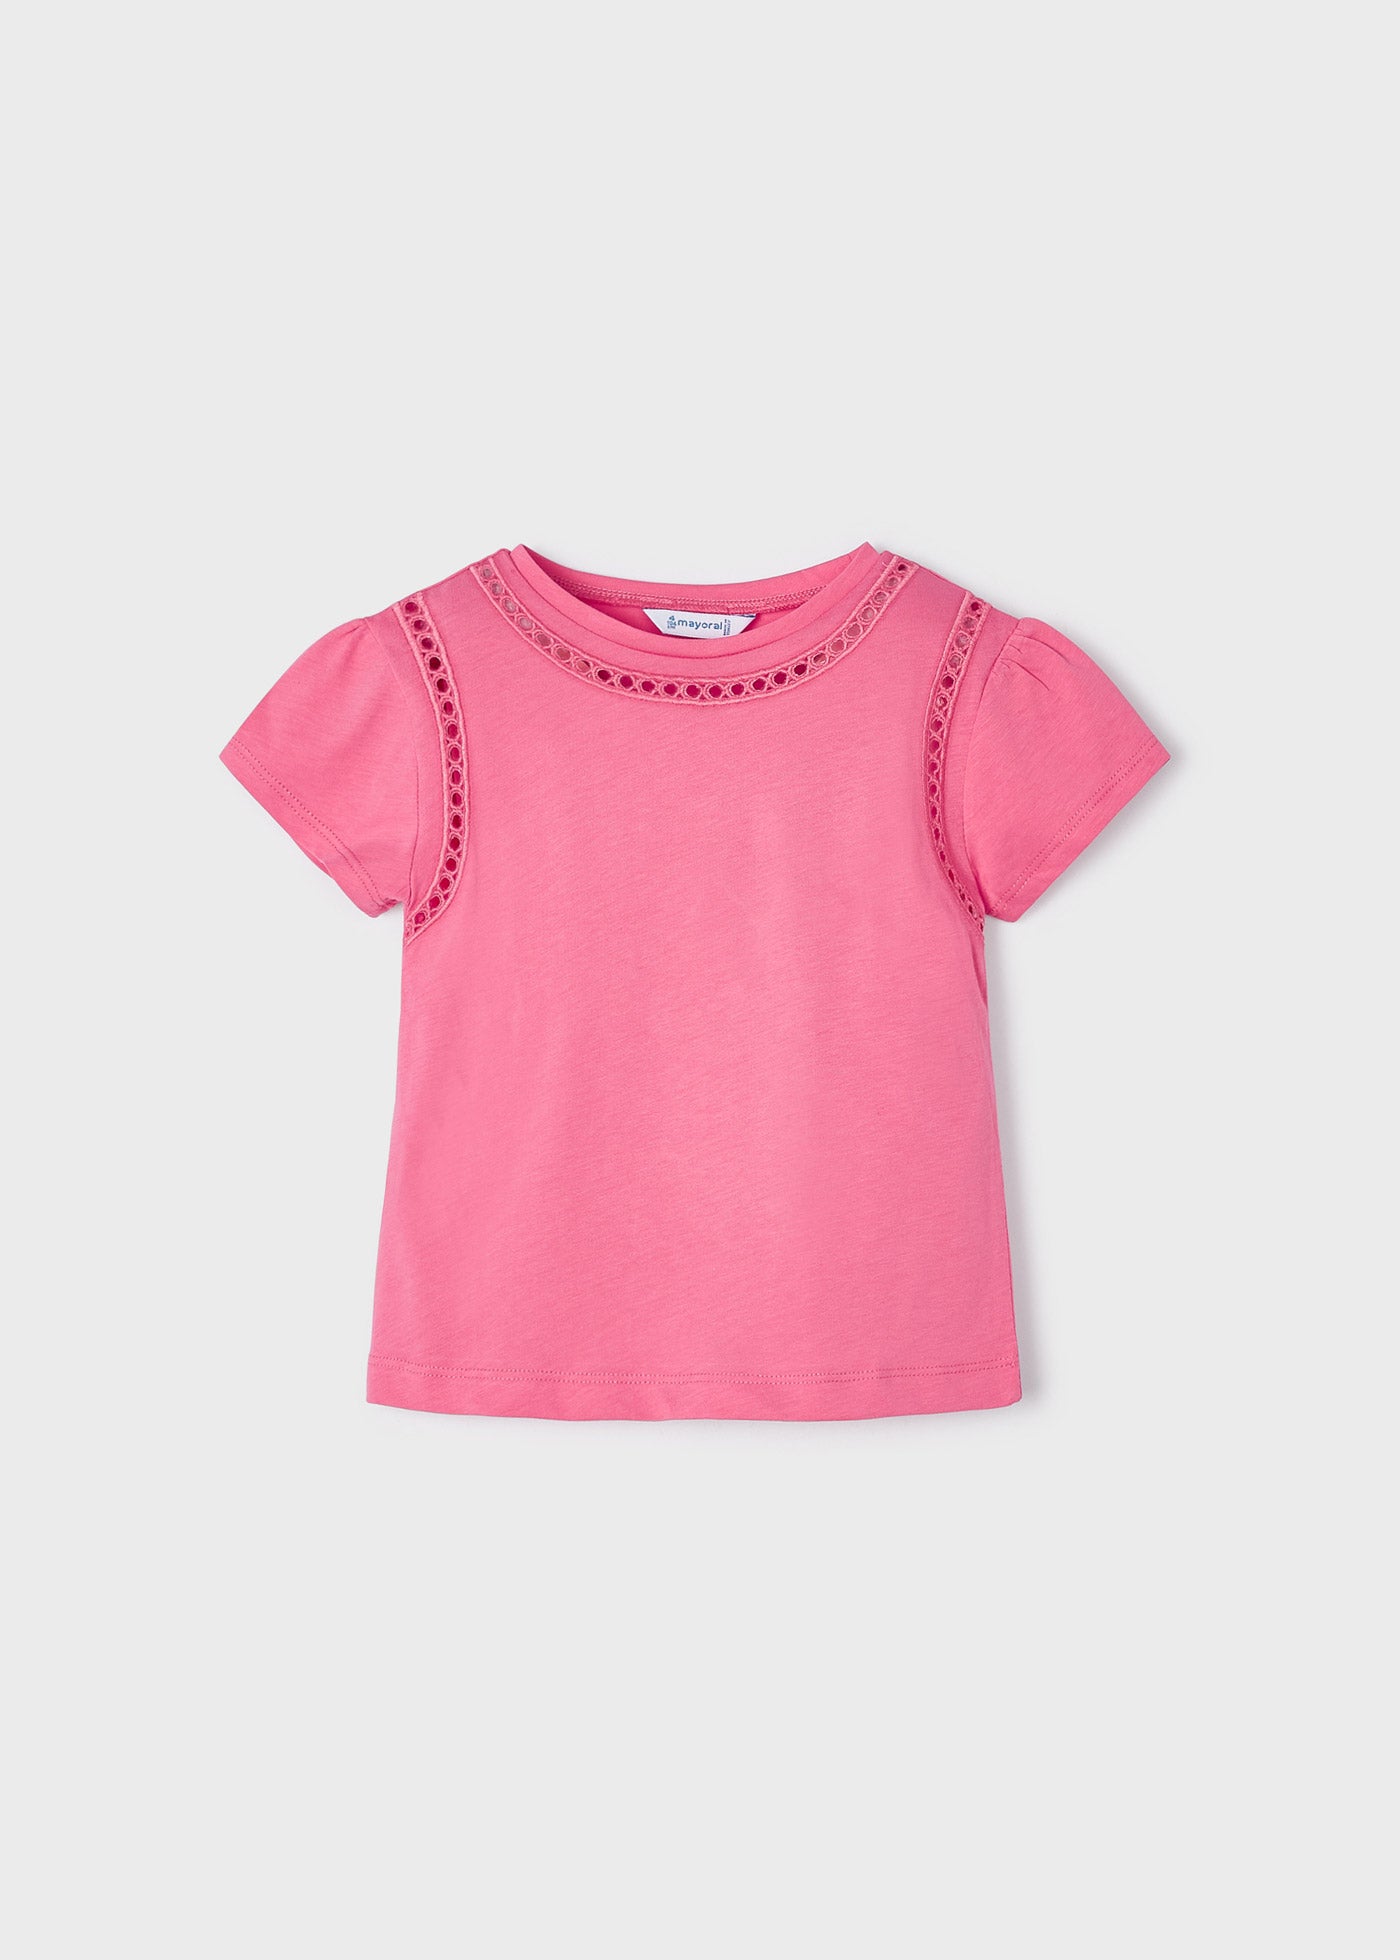 Mayoral Mini T-Shirt w/Embroidery Details _Pink 3057-16